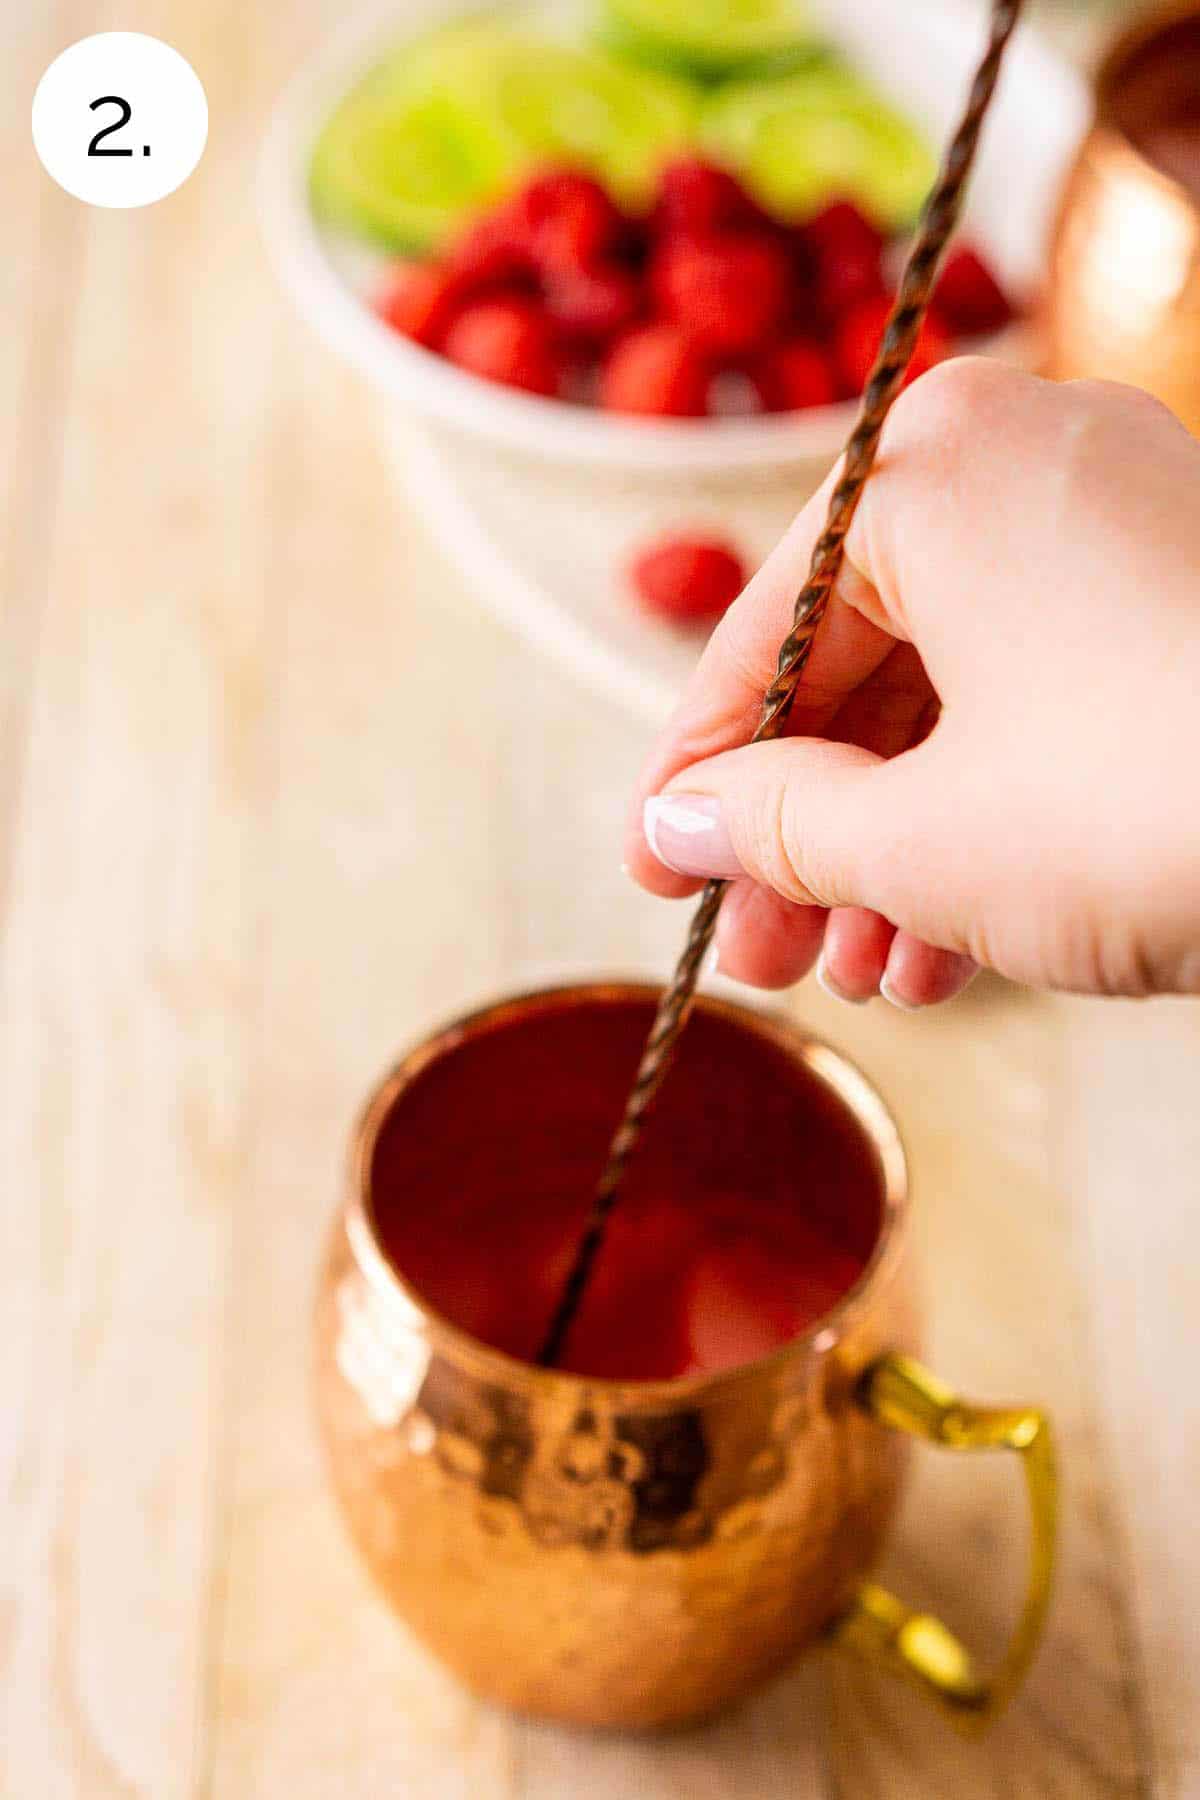 A hand stirring a long bar spoon to combine the raspberry mixture in the copper mug.